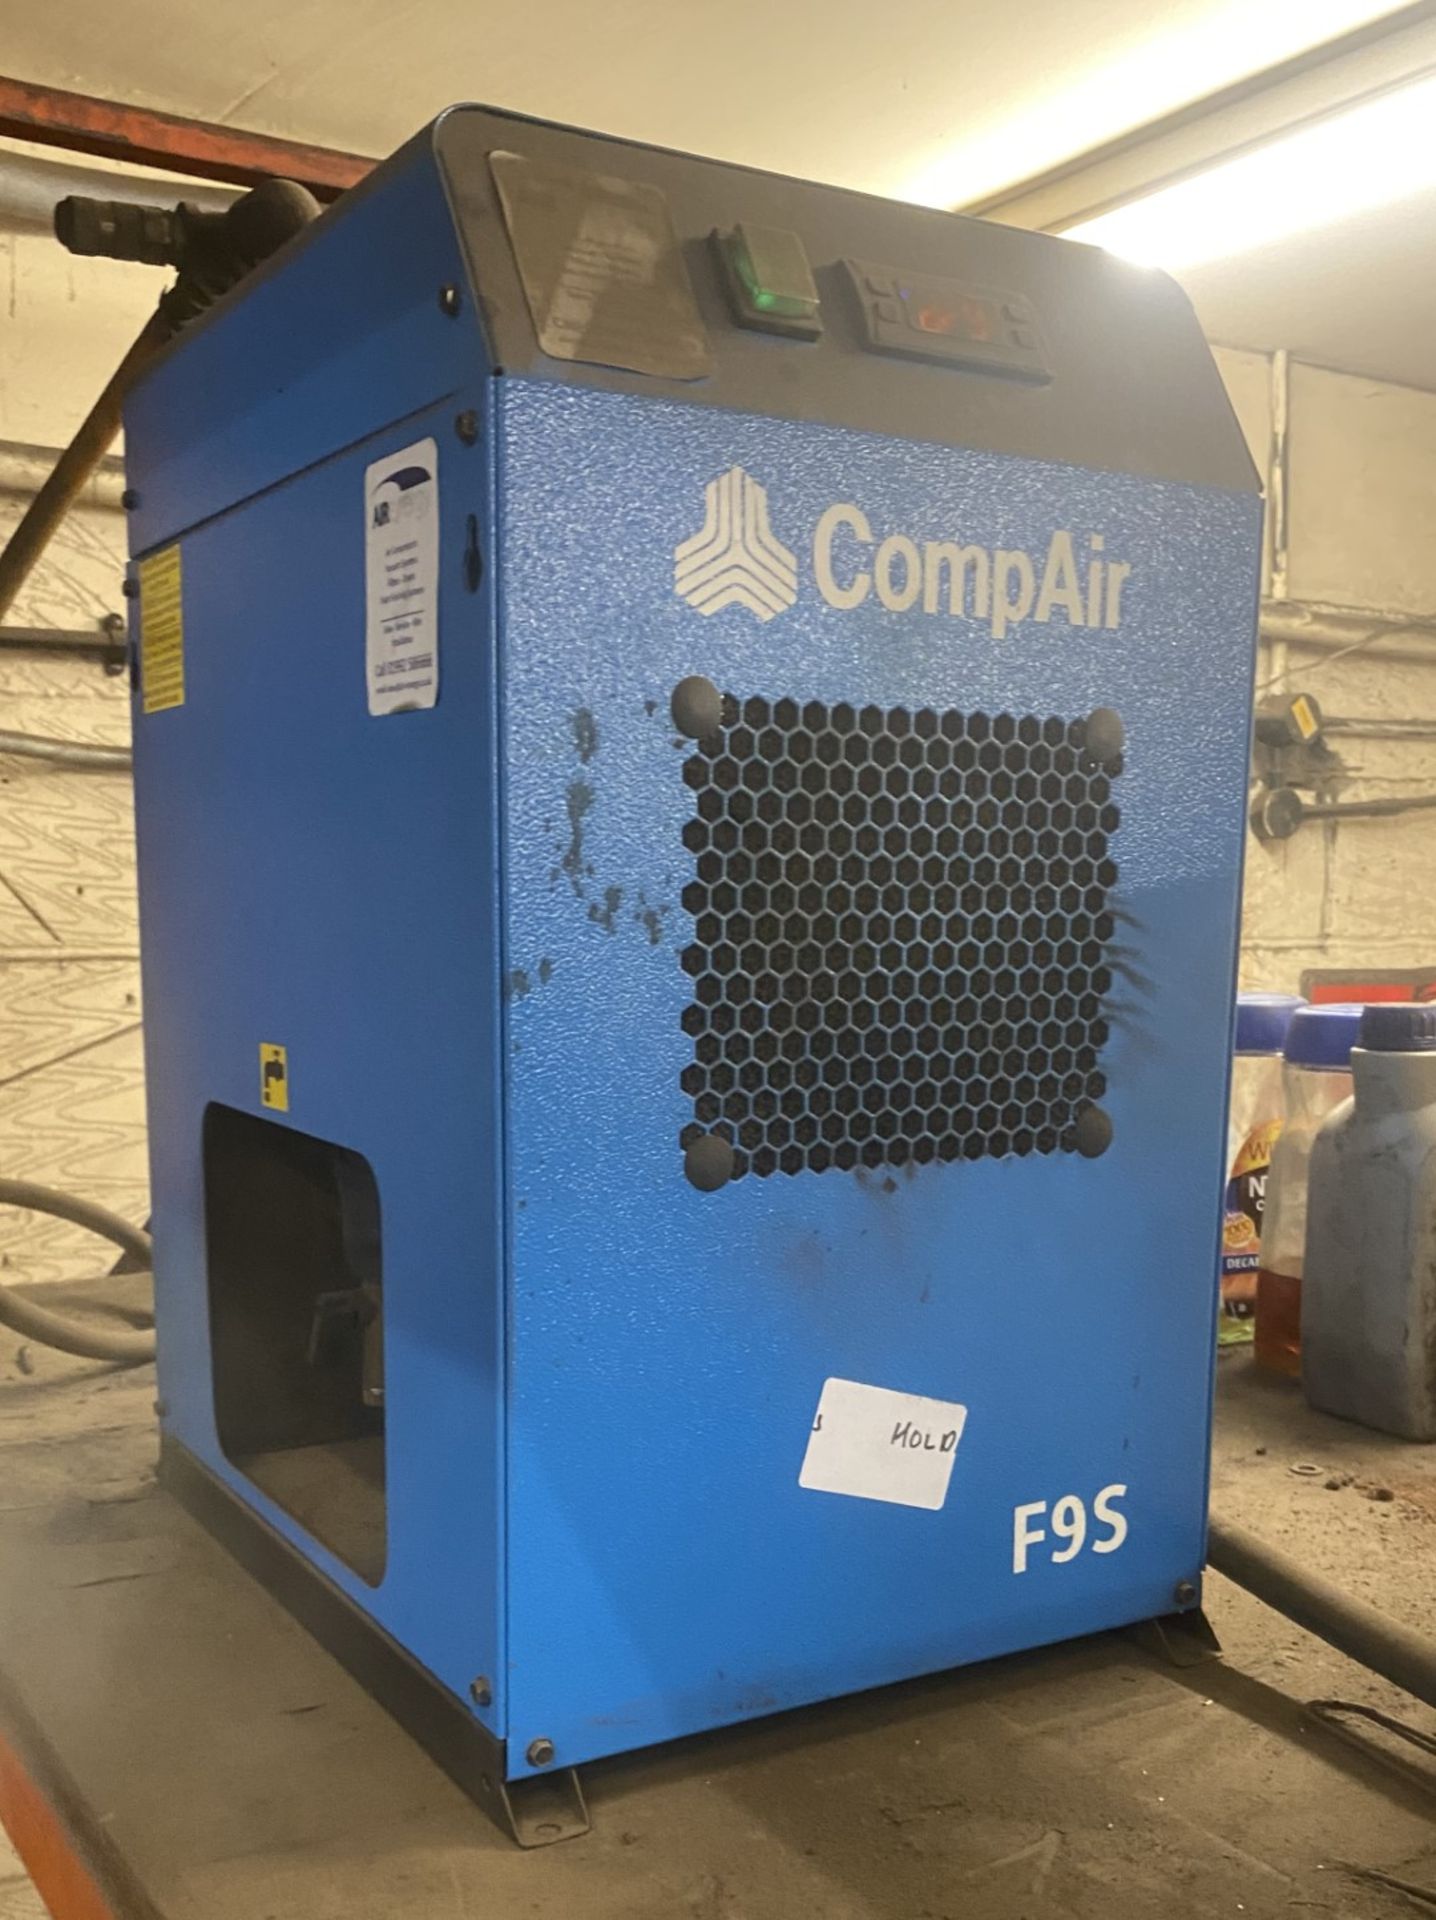 1 x Hydrovane Industrial Air Compressor With a Compair F9S Refrigerant Dryer - Image 4 of 4